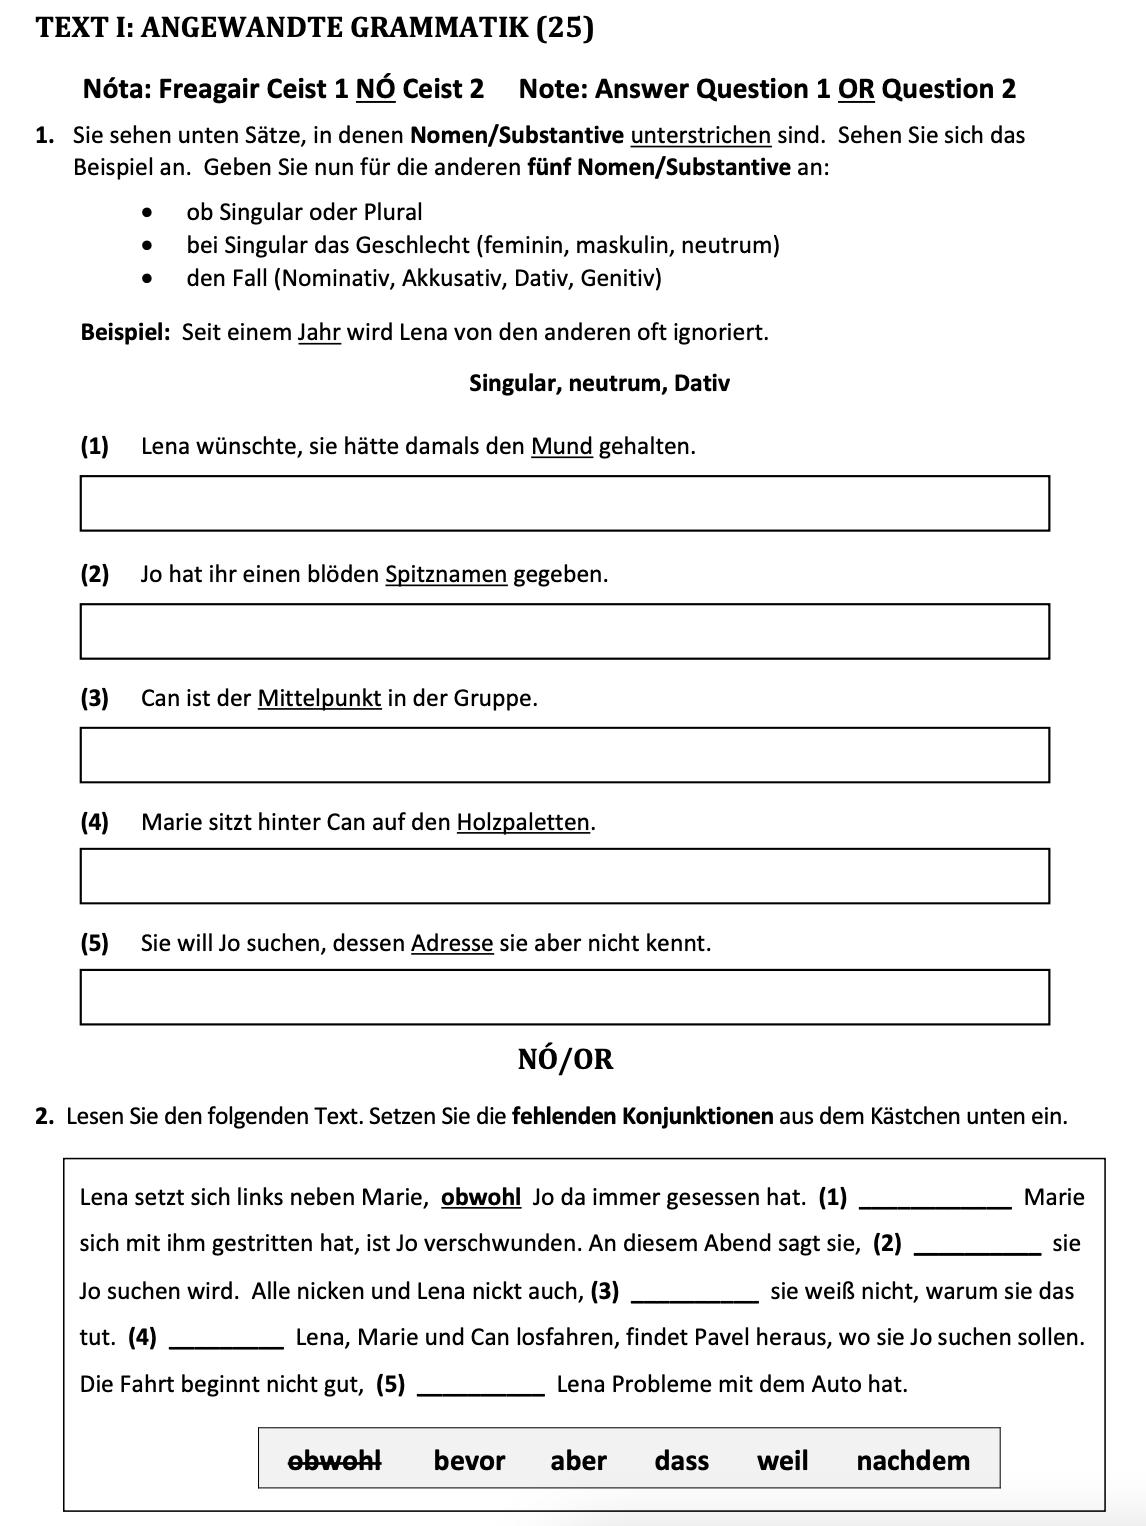 an image of the question 2023 Text I Angewandte Grammatik which is about the topic grammatik and the subject is Leaving Certificate german